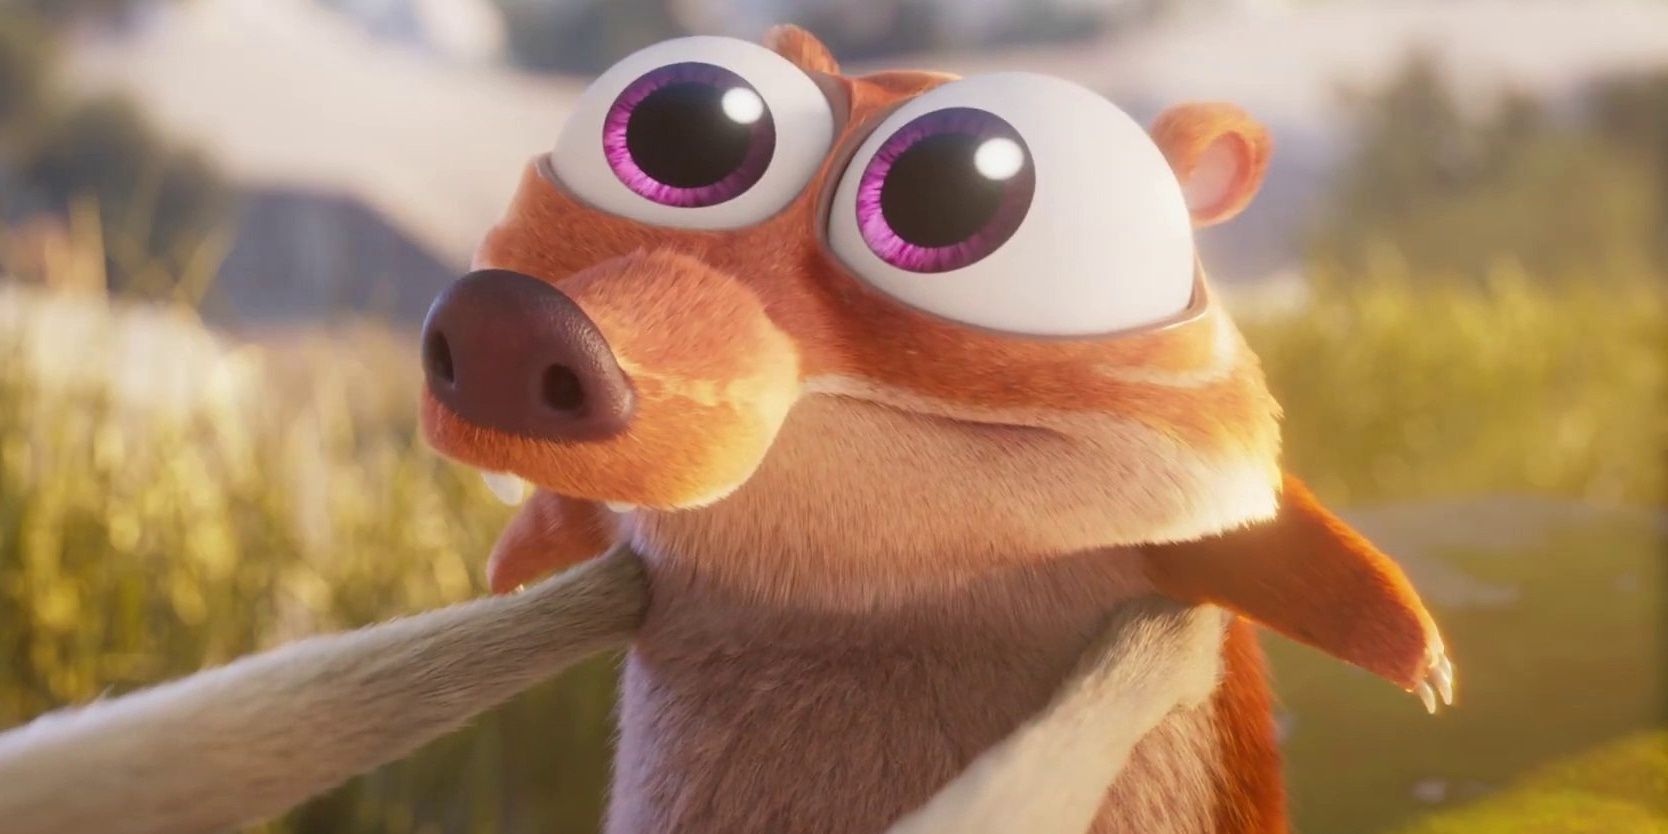 Baby Scrat stares lovngly at Scrat.